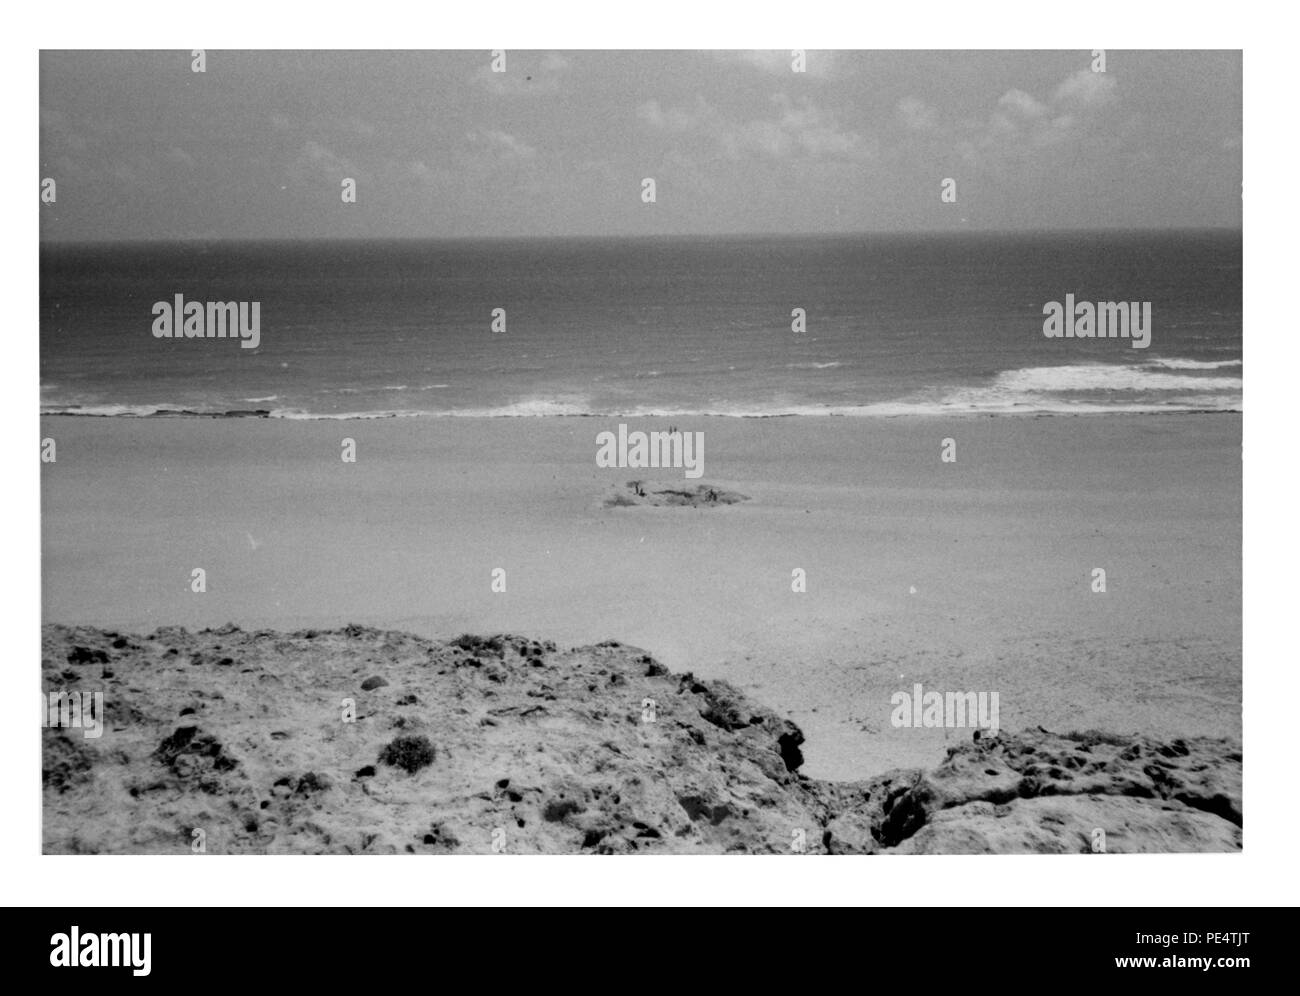 Here is a distant picture of the coastal well site - Indian Ocean in the background. Picture #26. Stock Photo